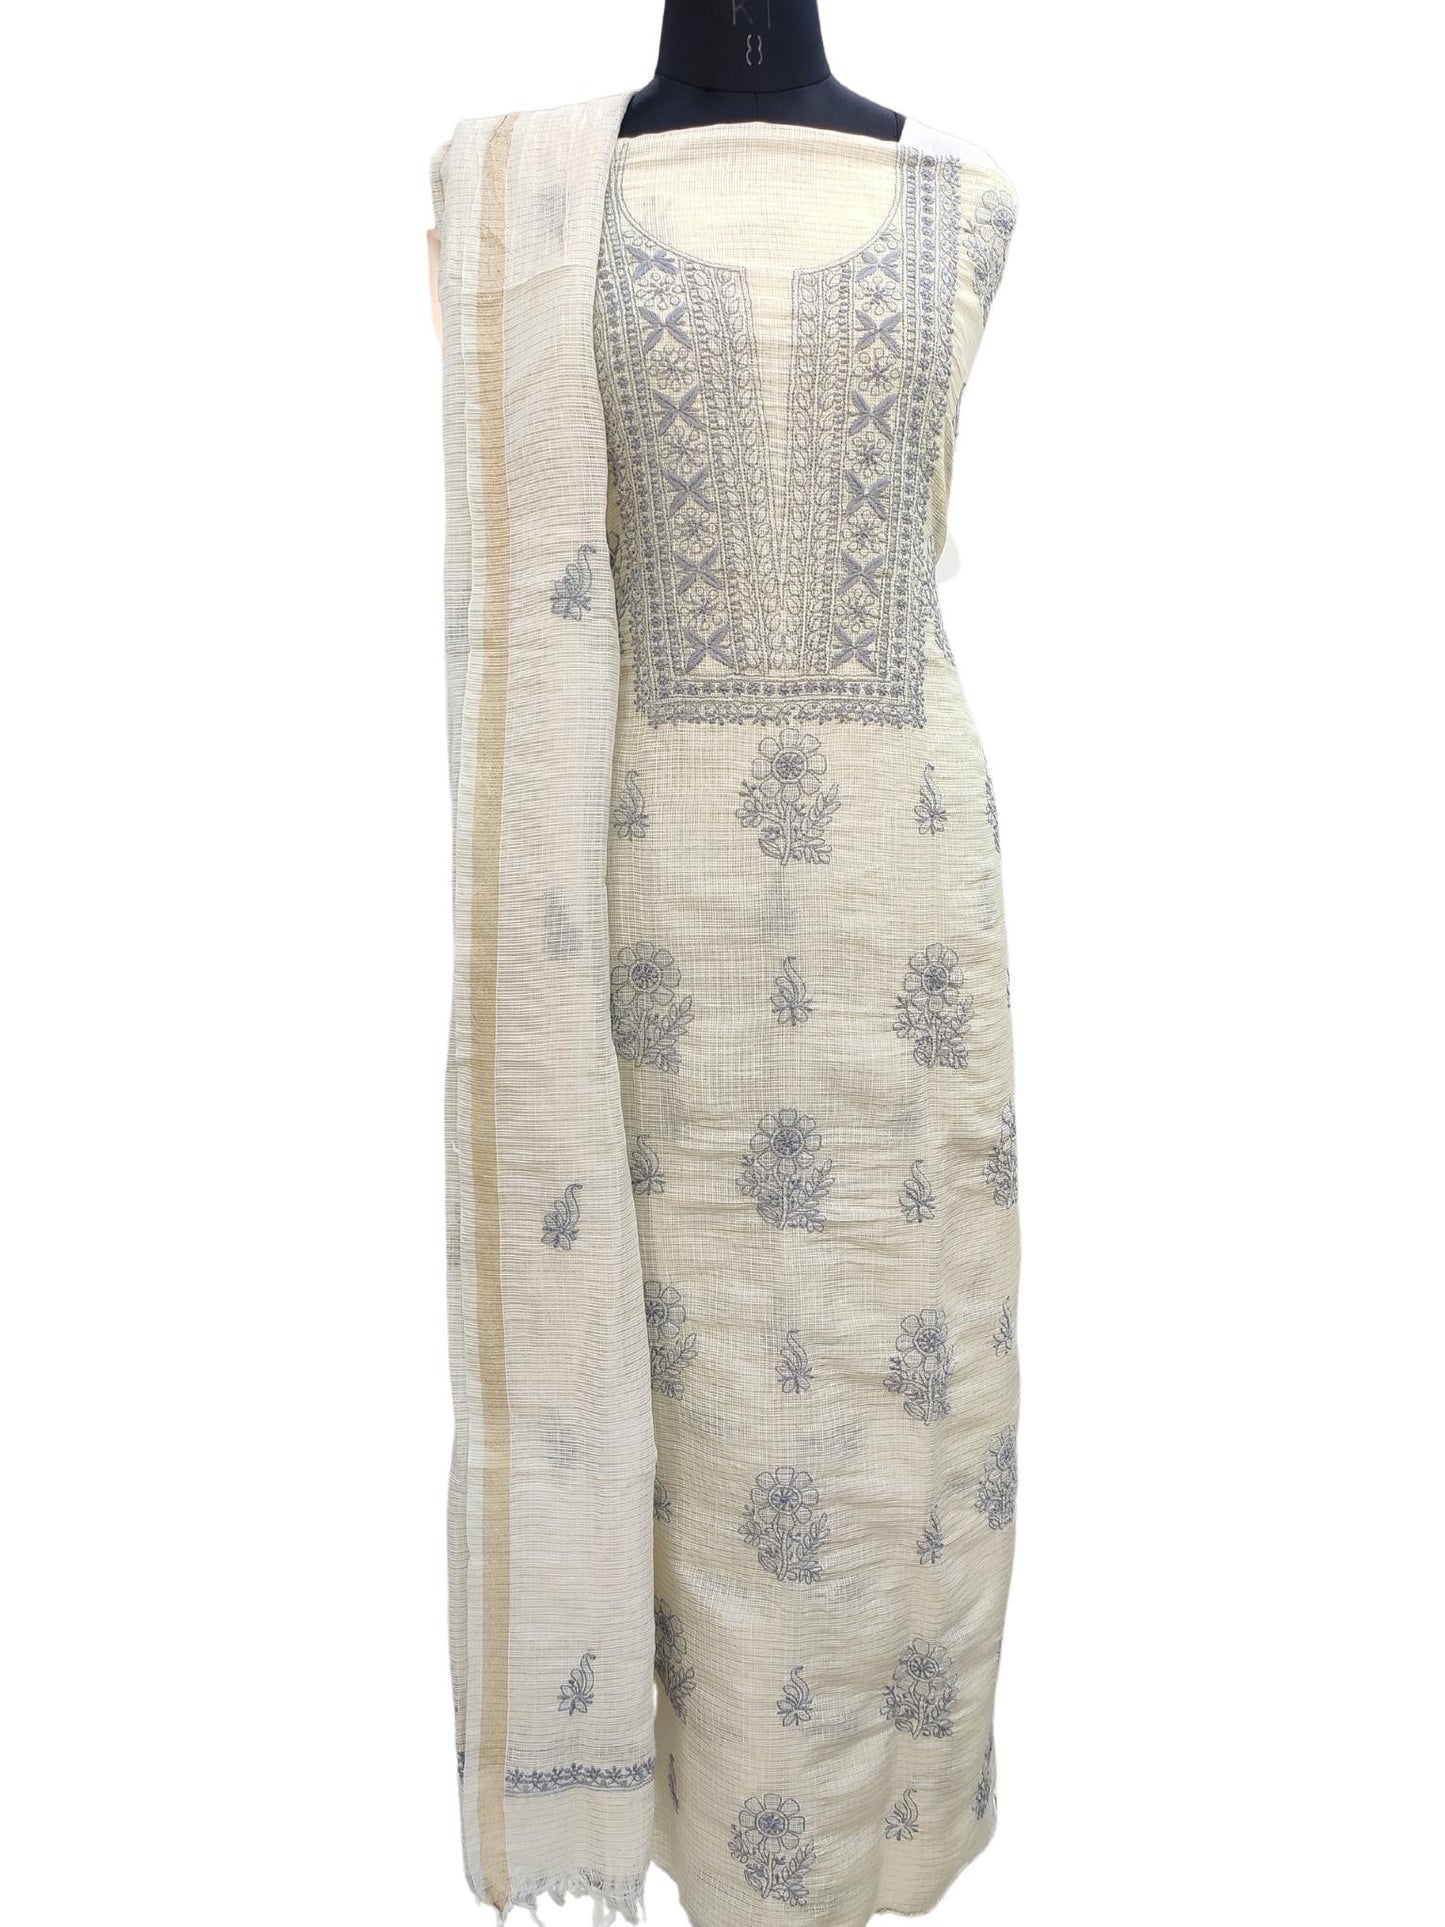 Shyamal Chikan Hand Embroidered Fawn Tissue Kota Cotton Lucknowi Chikankari Unstitched Suit Piece ( Set of 2 ) - S20798